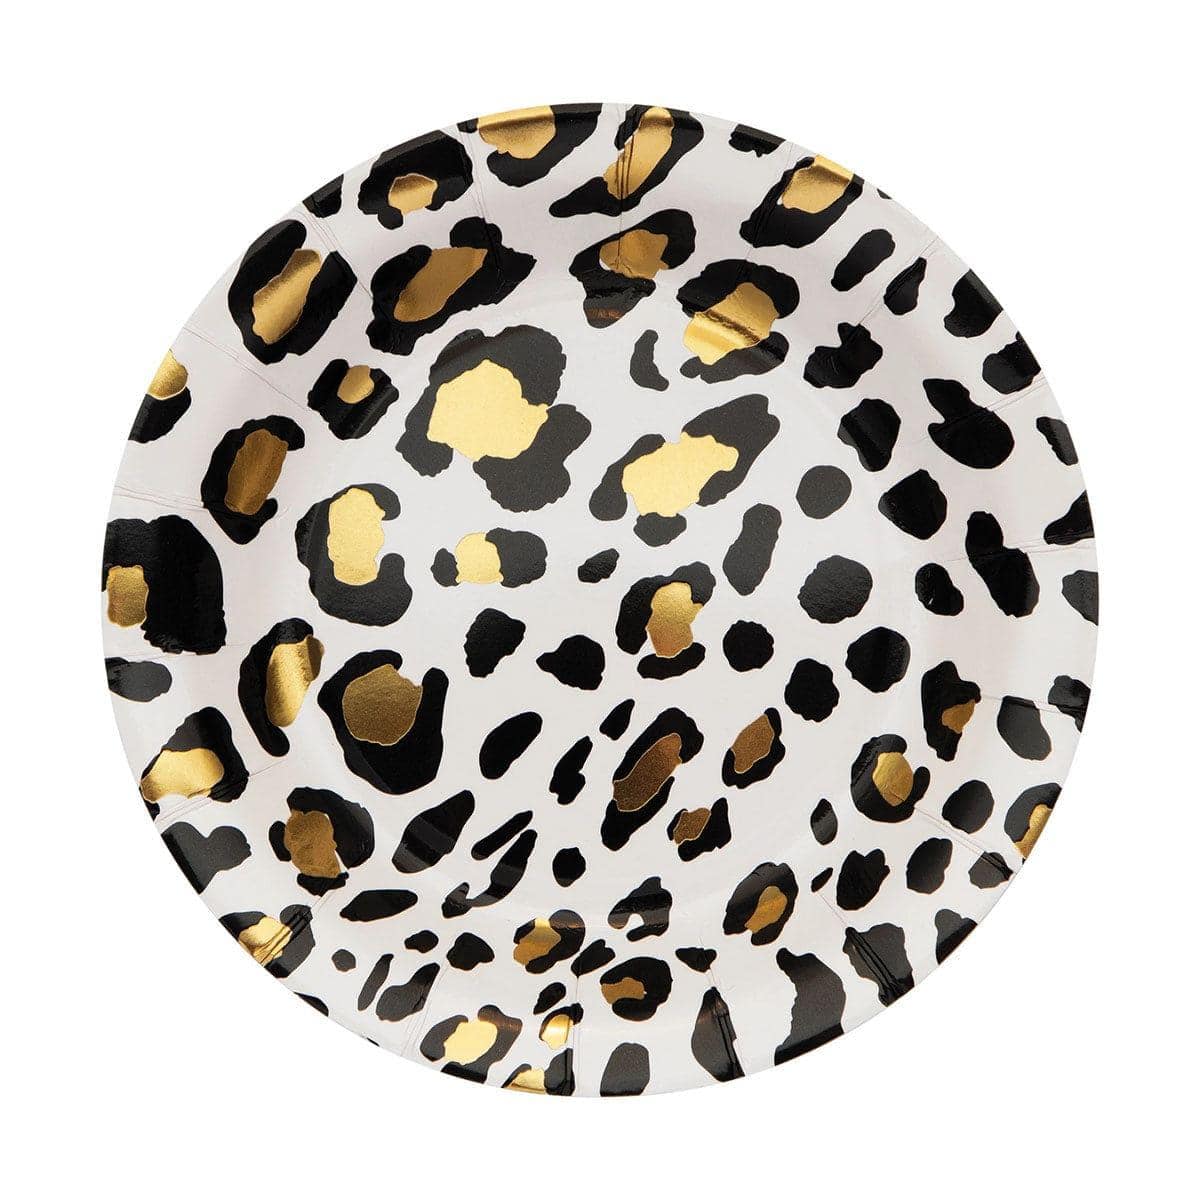 CREATIVE CONVERTING Everyday Entertaining Leopard Dessert Paper Plates, 7 in, 8 Count